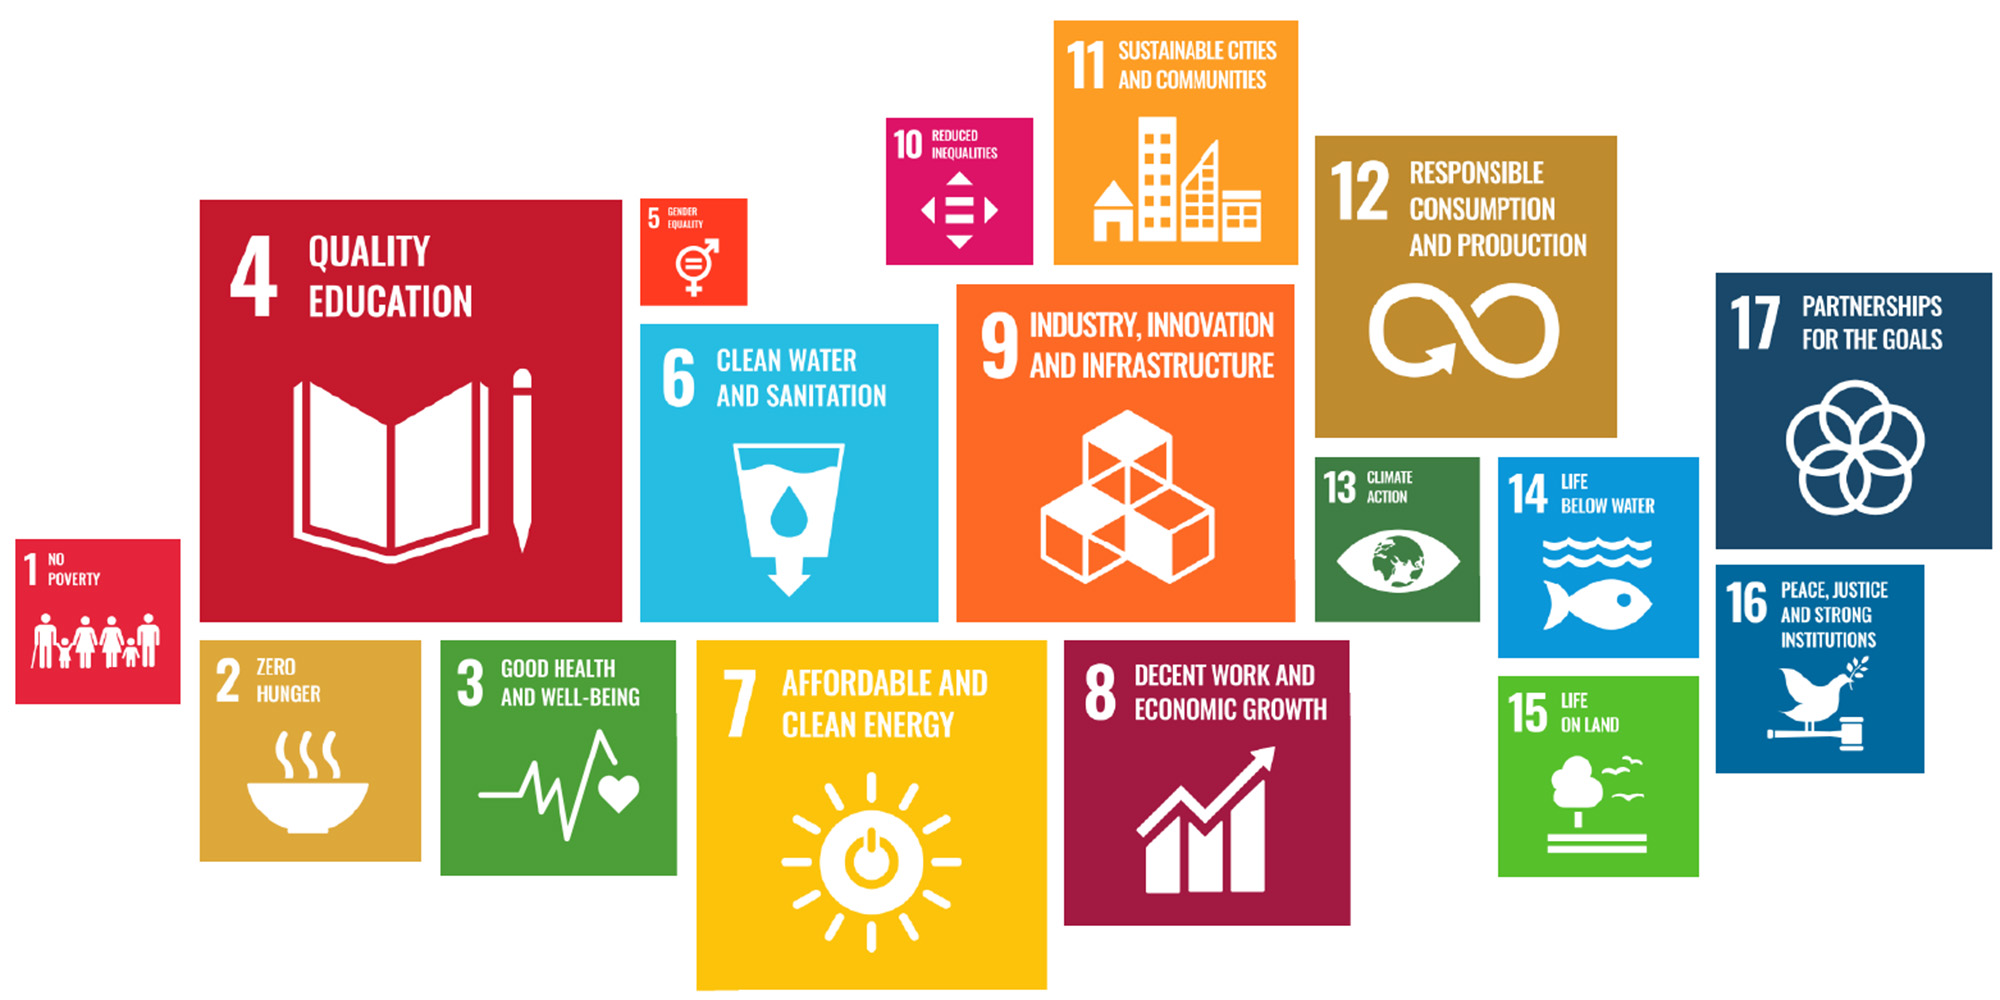 sustainable-development-goals-report-2000x1000-cropped.jpg